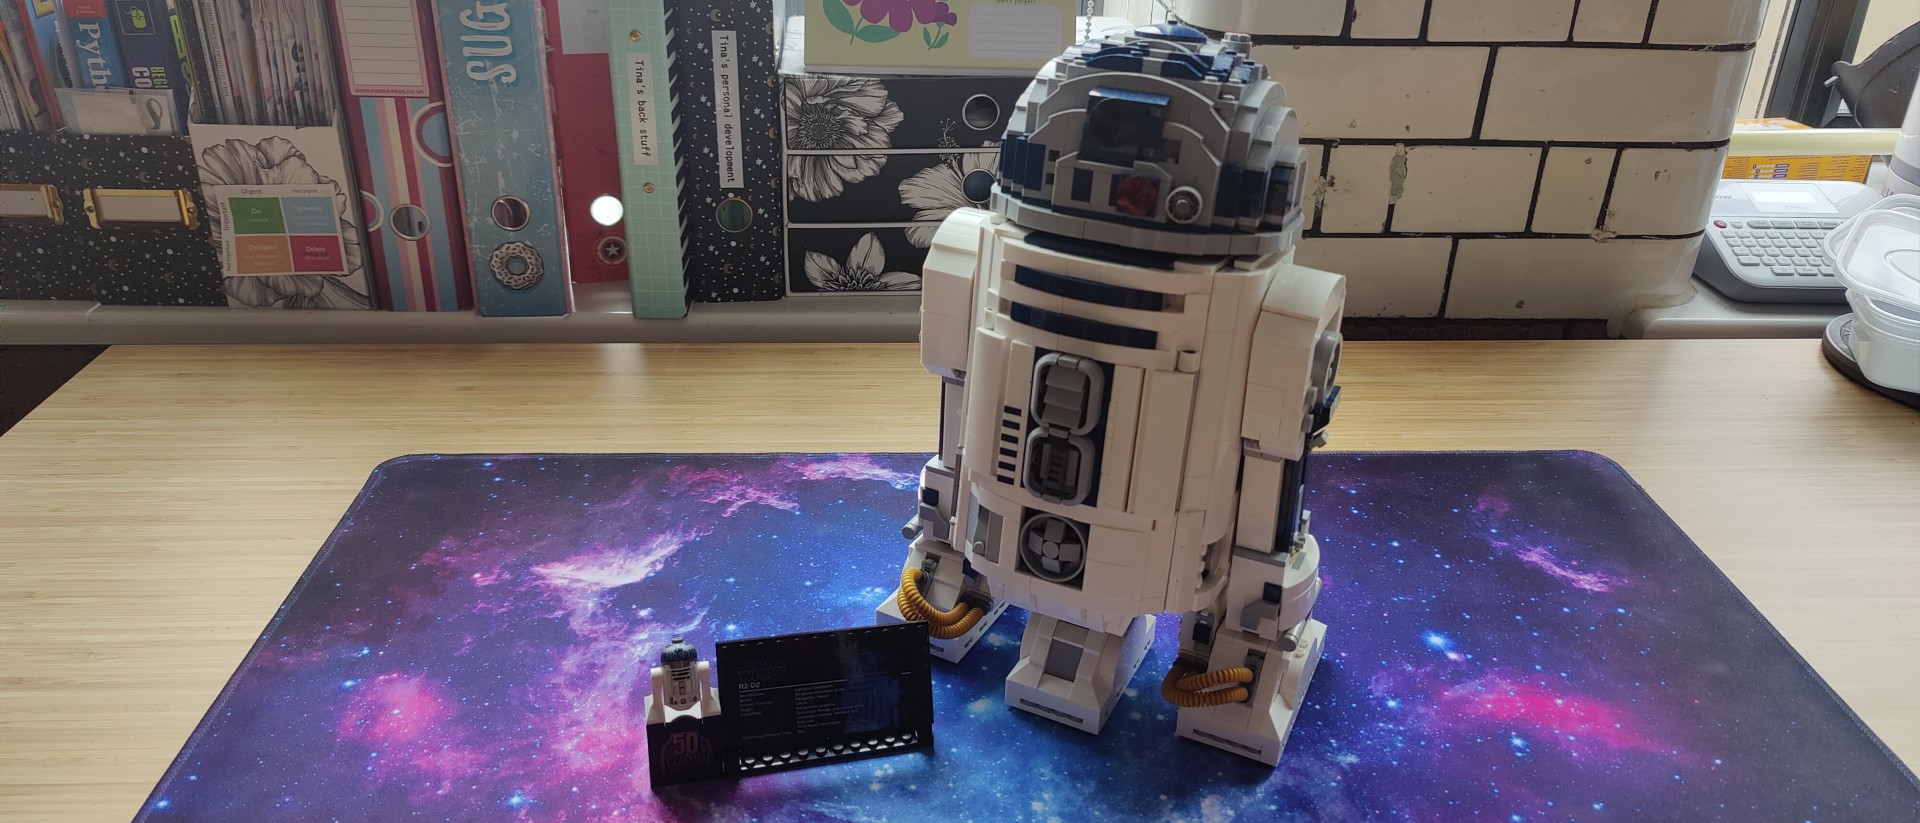 LEGO R2-D2 review: Most detailed version of the droid yet - 9to5Toys